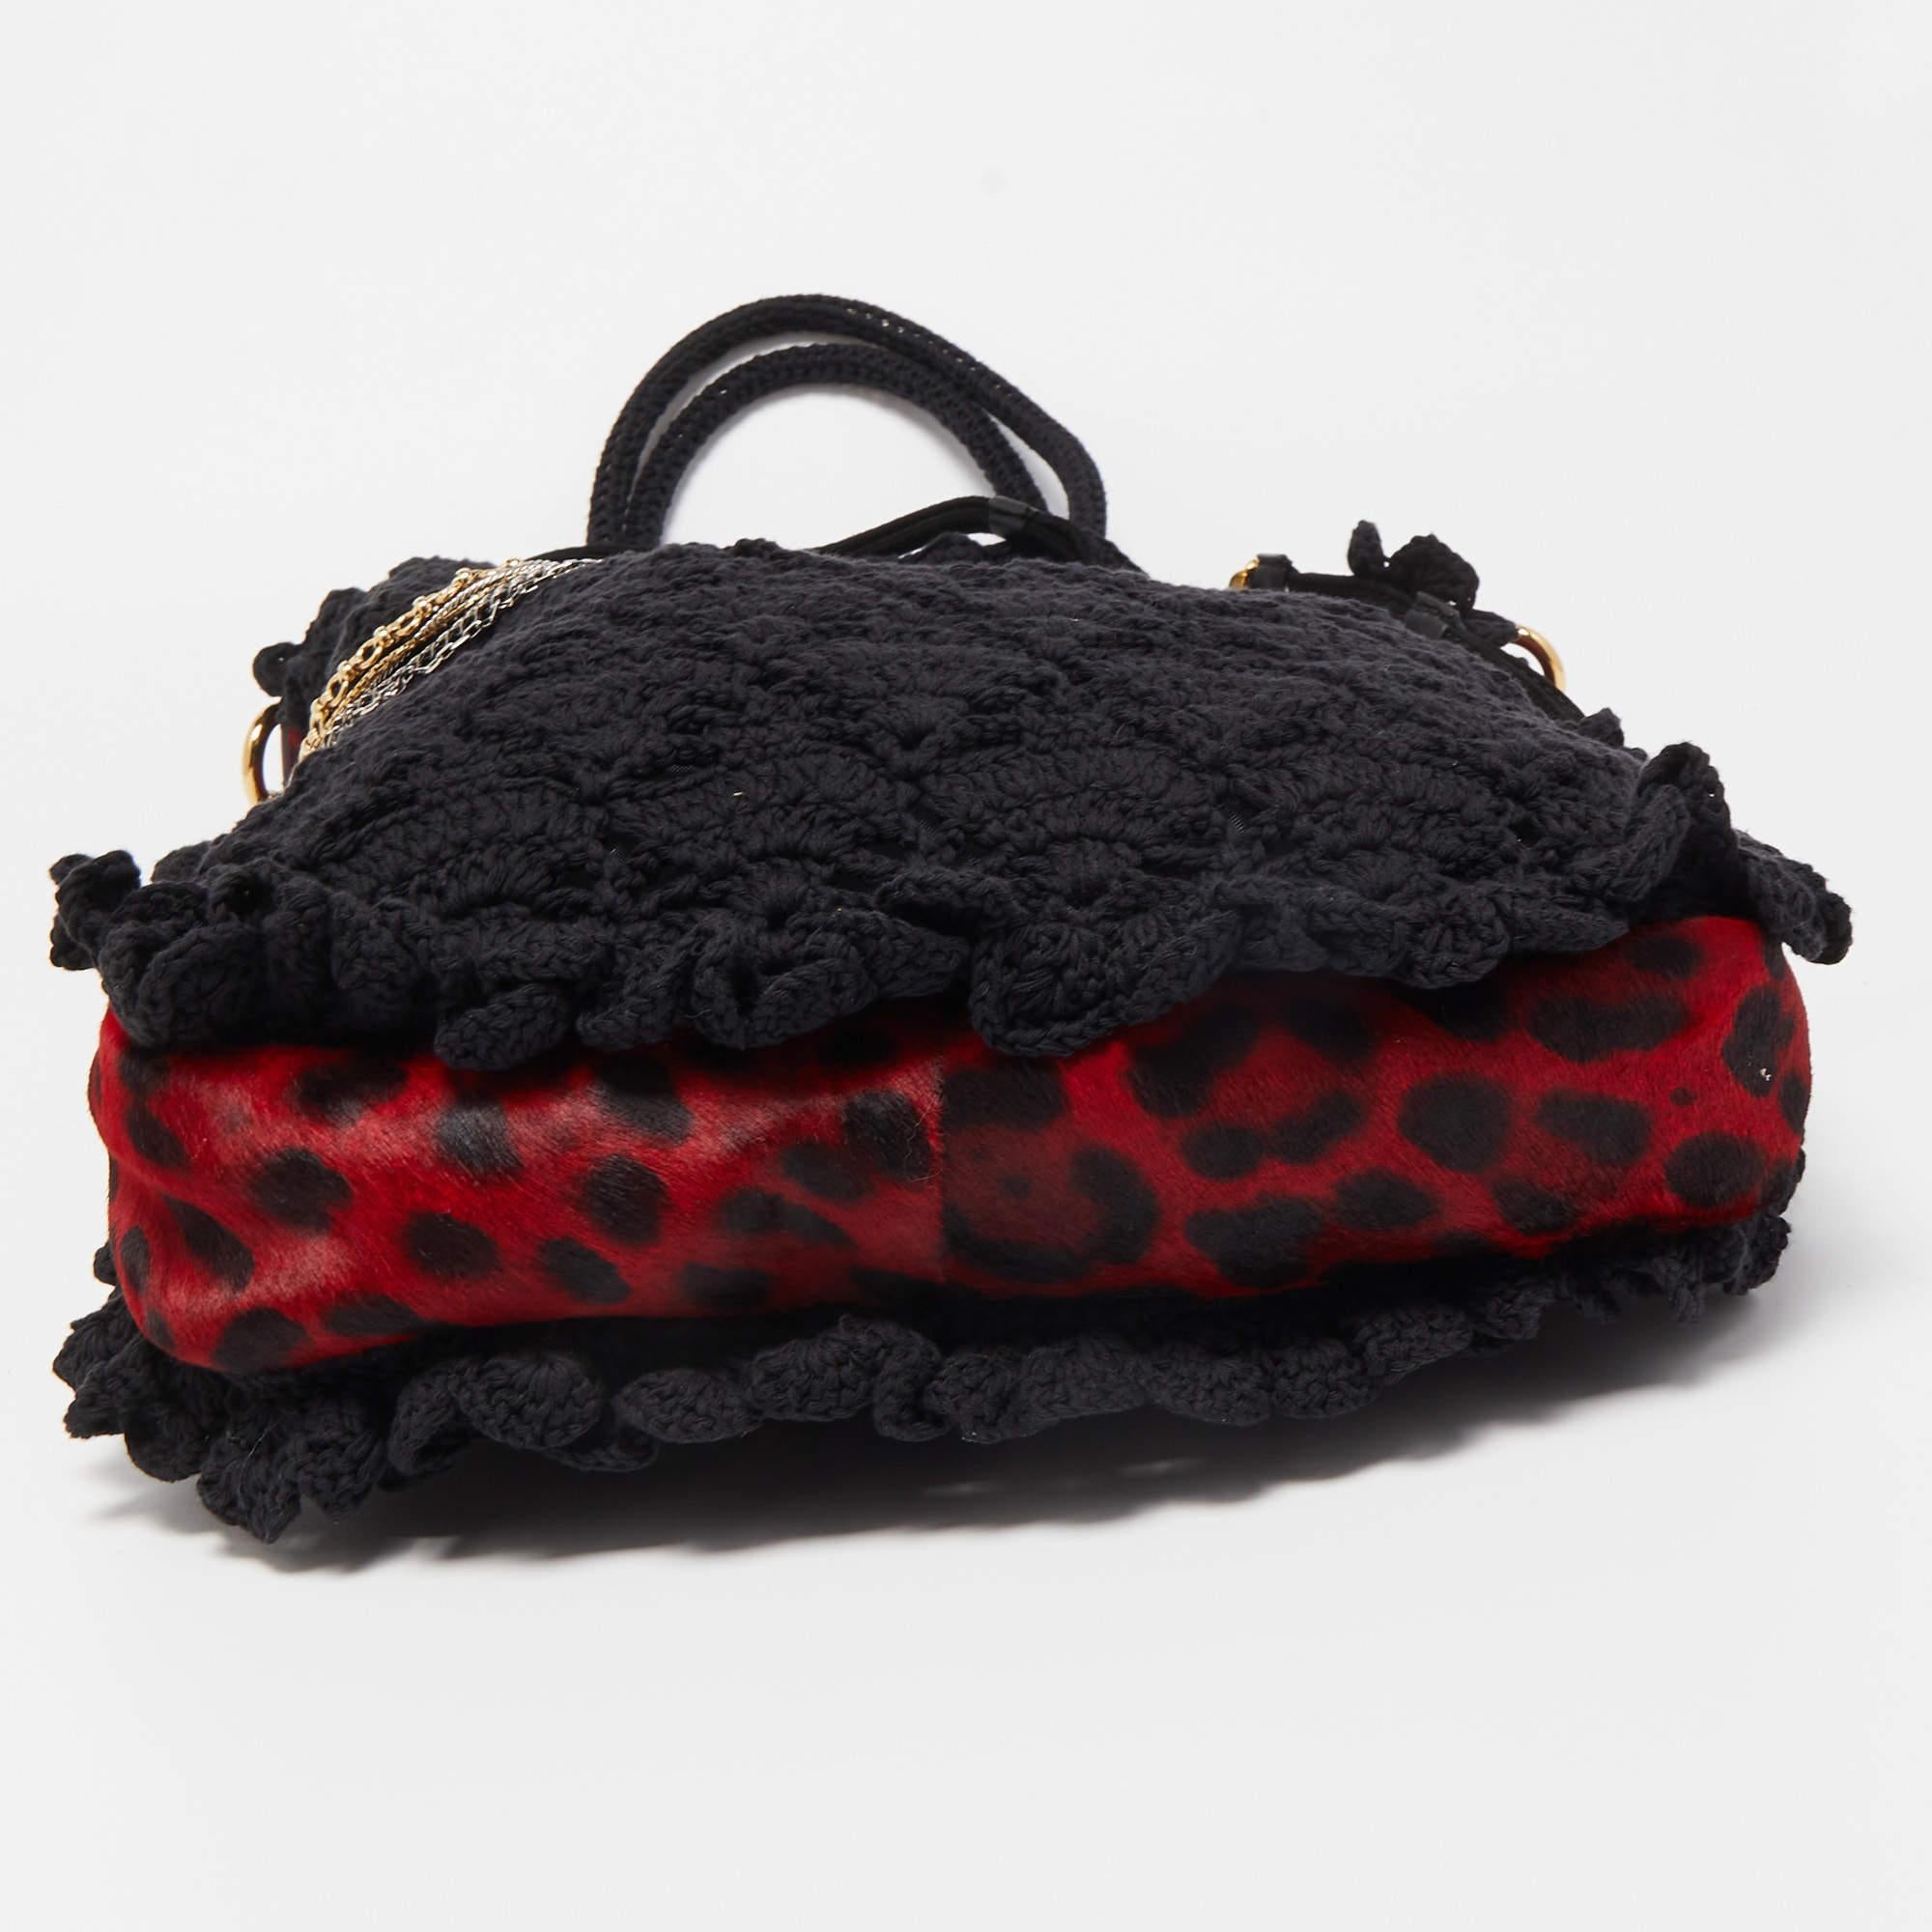 Dolce & Gabbana Black/Red Crochet and Leopard Print Calf Hair Tote For Sale 5